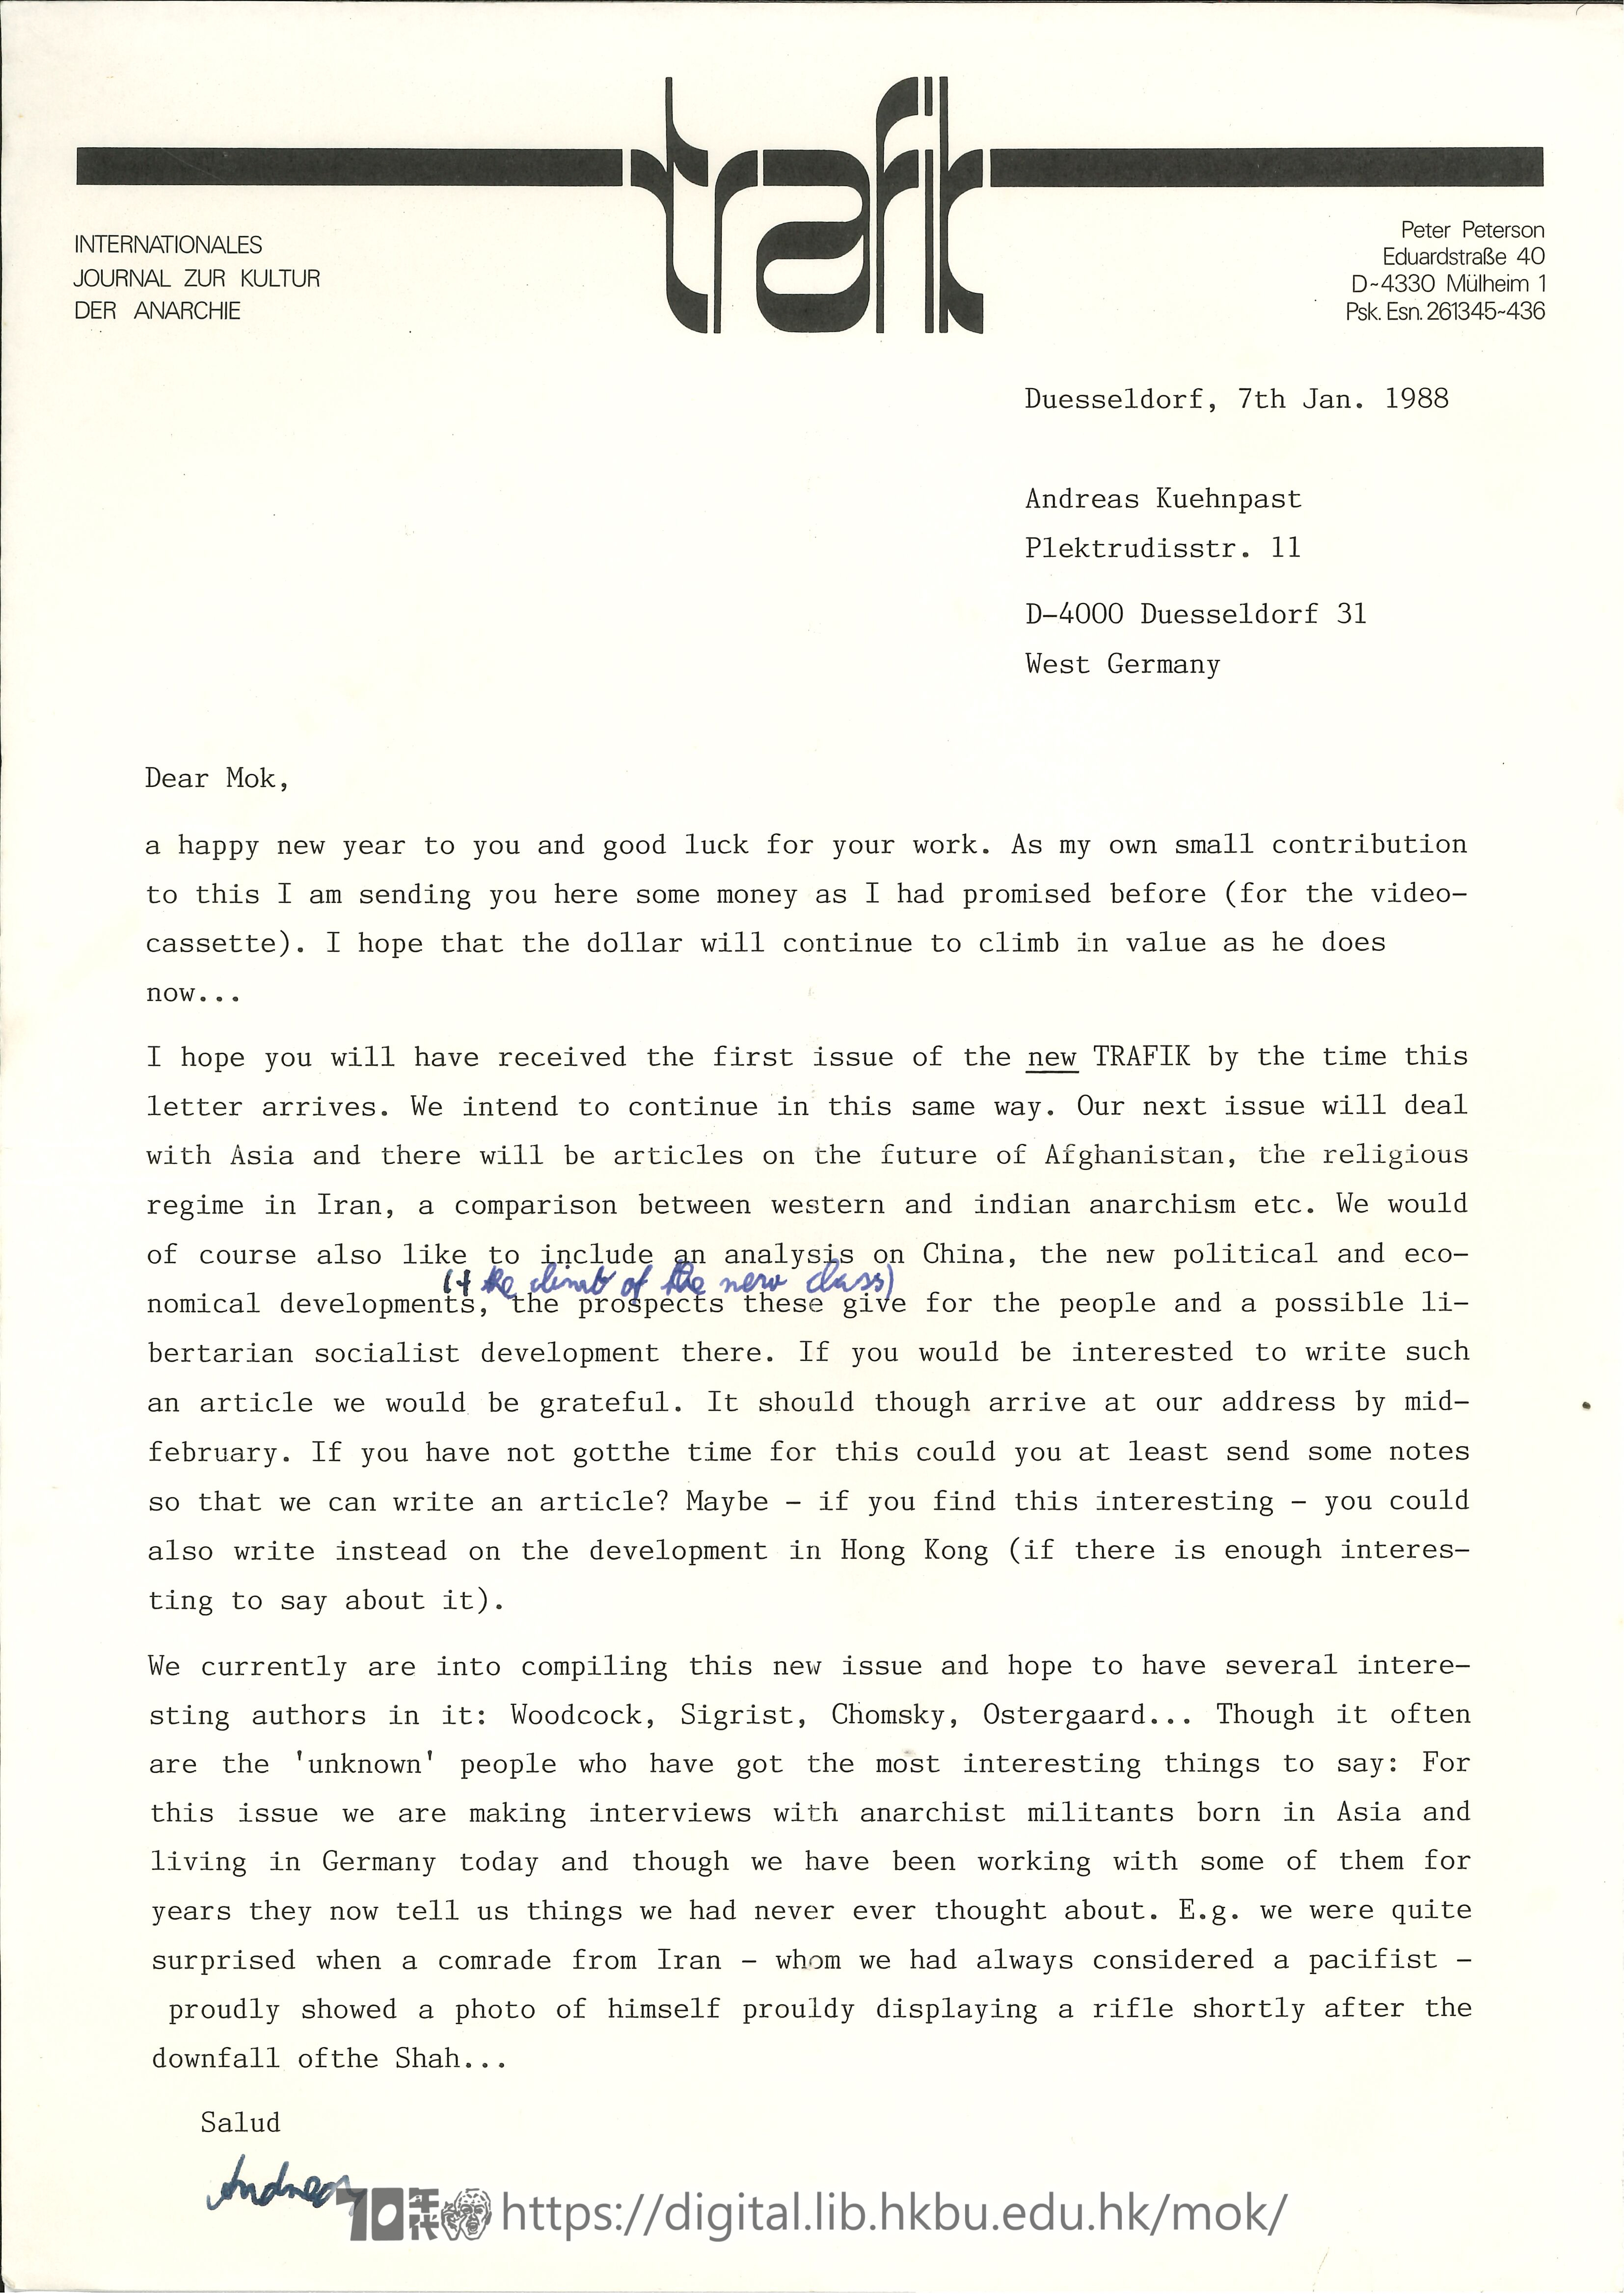   Letter from Andreas Kuehnpast to Mok Chiu Yu and Quo KUEHNPAST, Andreas 